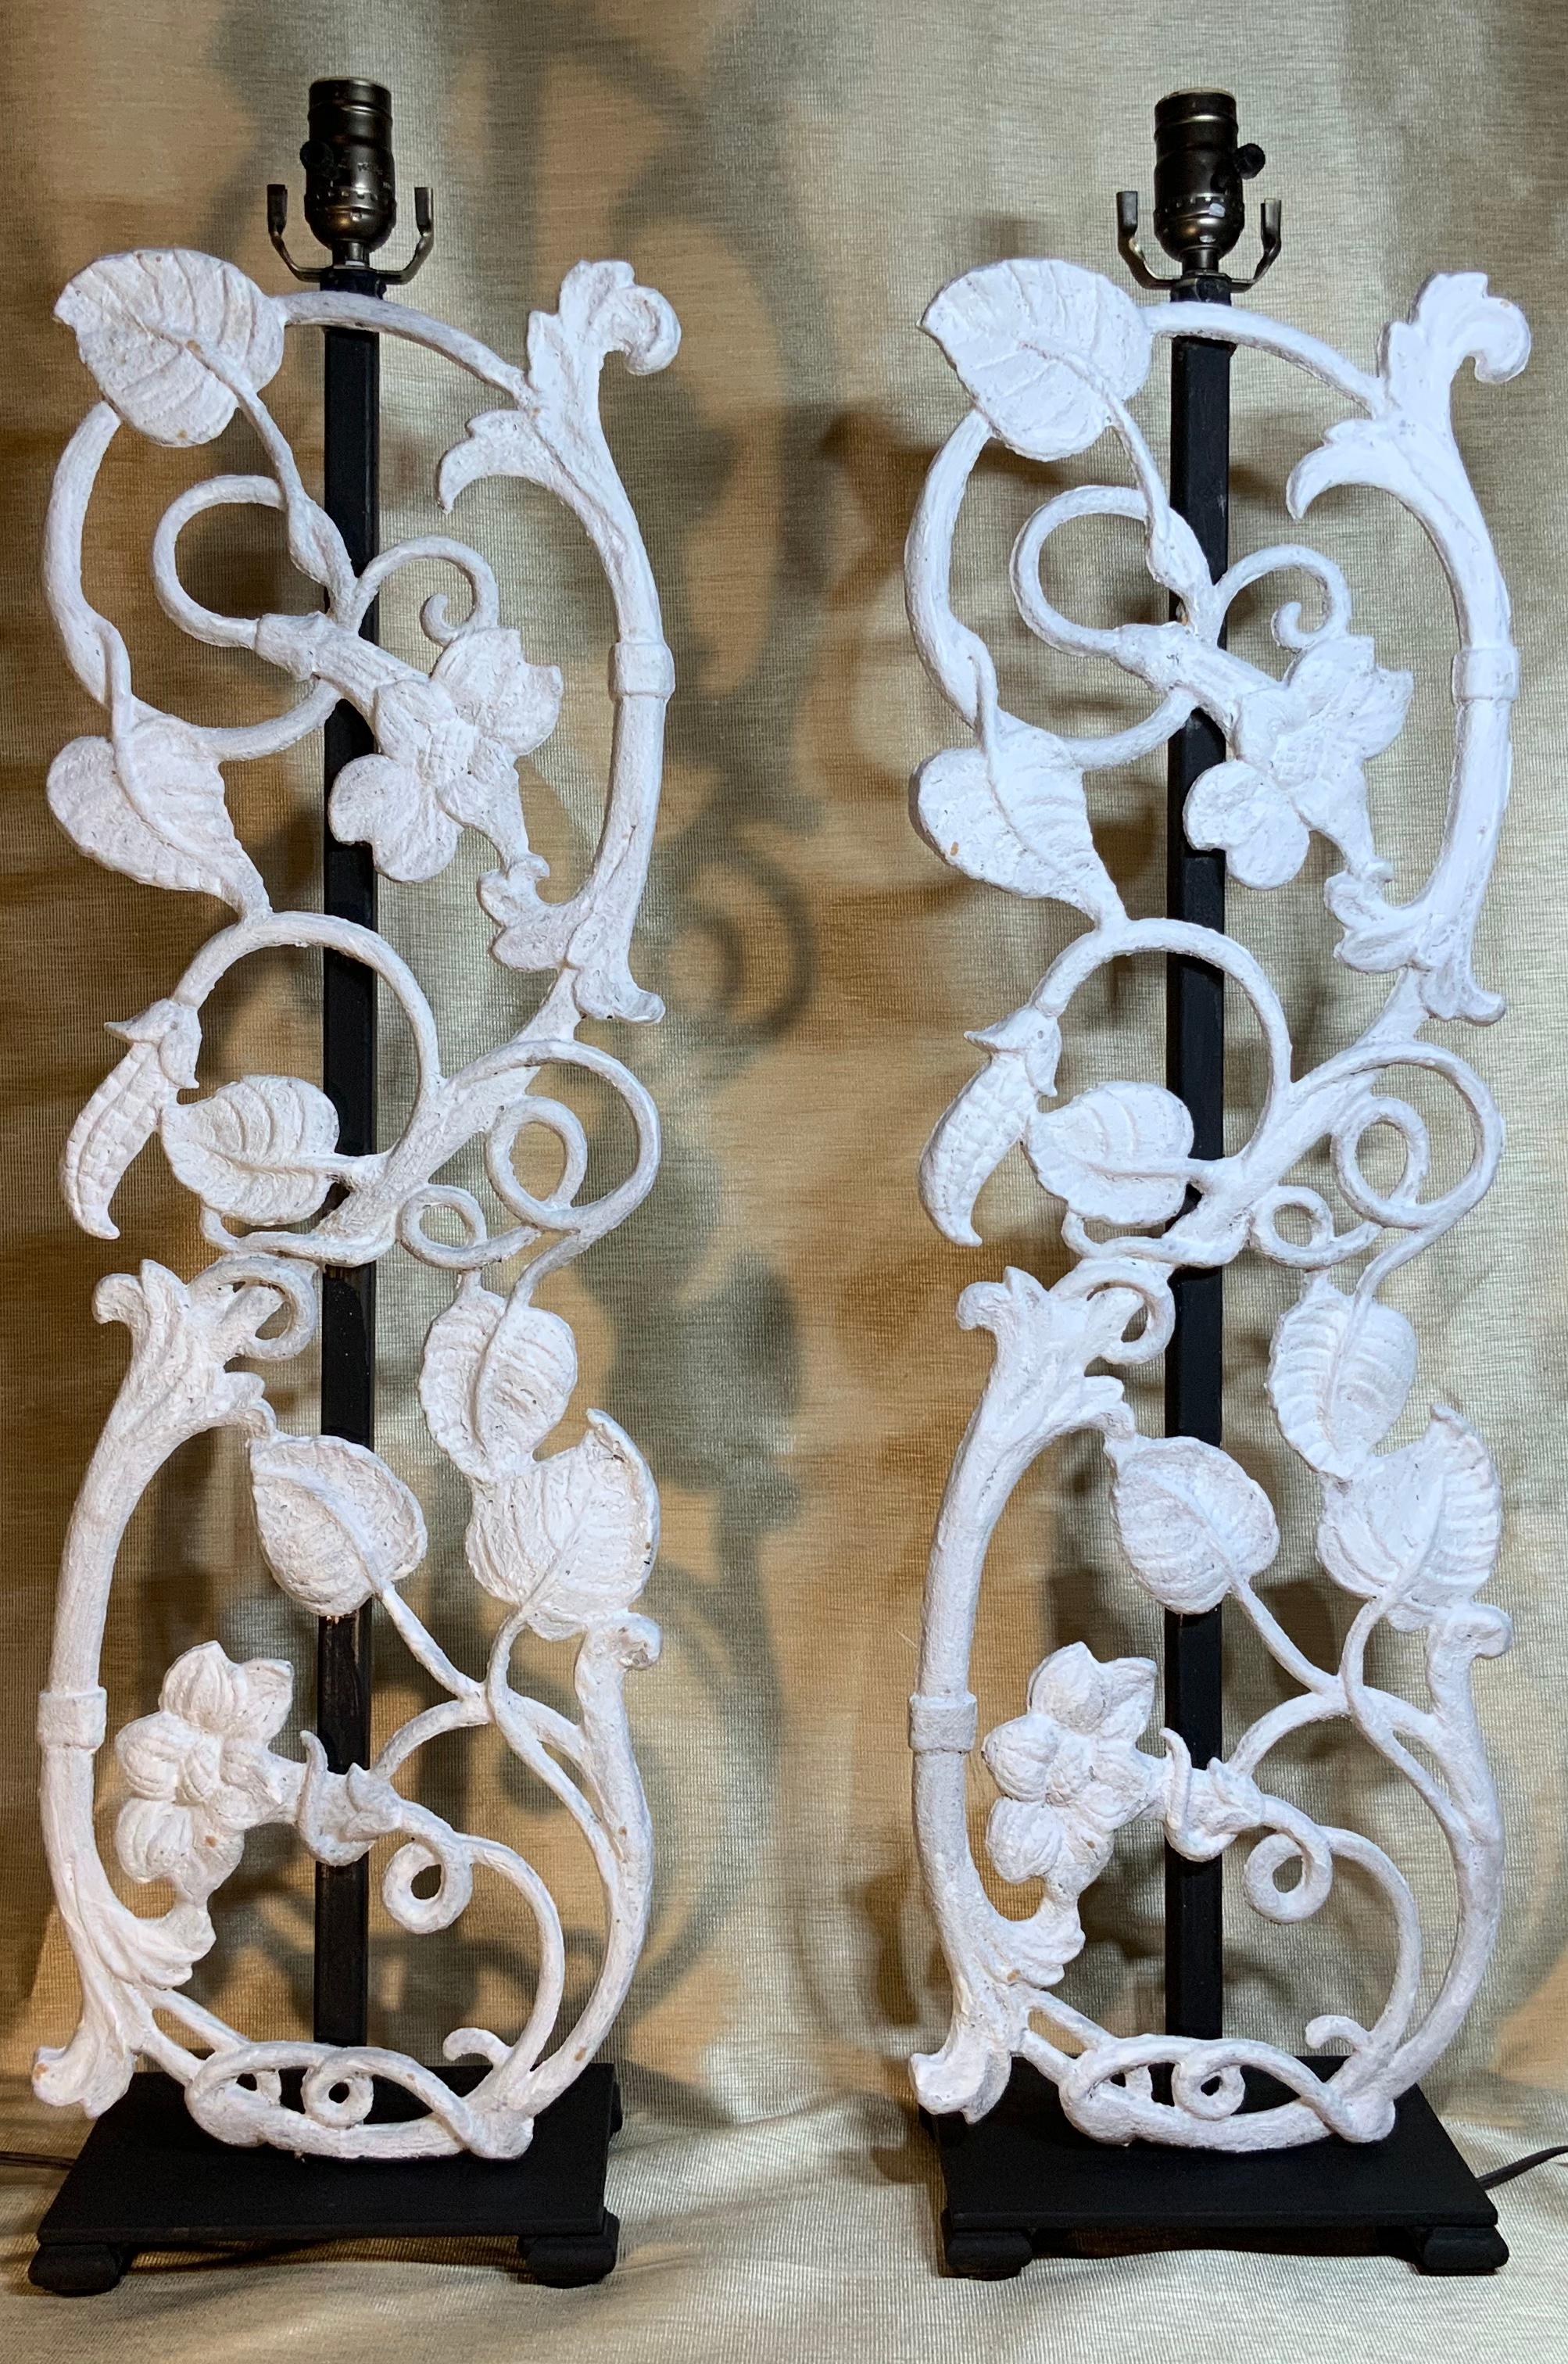 Elegant pair of table lamps made of cast iron with flowers and vines motif, hand painted in flat white, professionally mounted on a custom made steel base. Electrified and ready to light.
Great decorative pair for any room. Shades are not included.